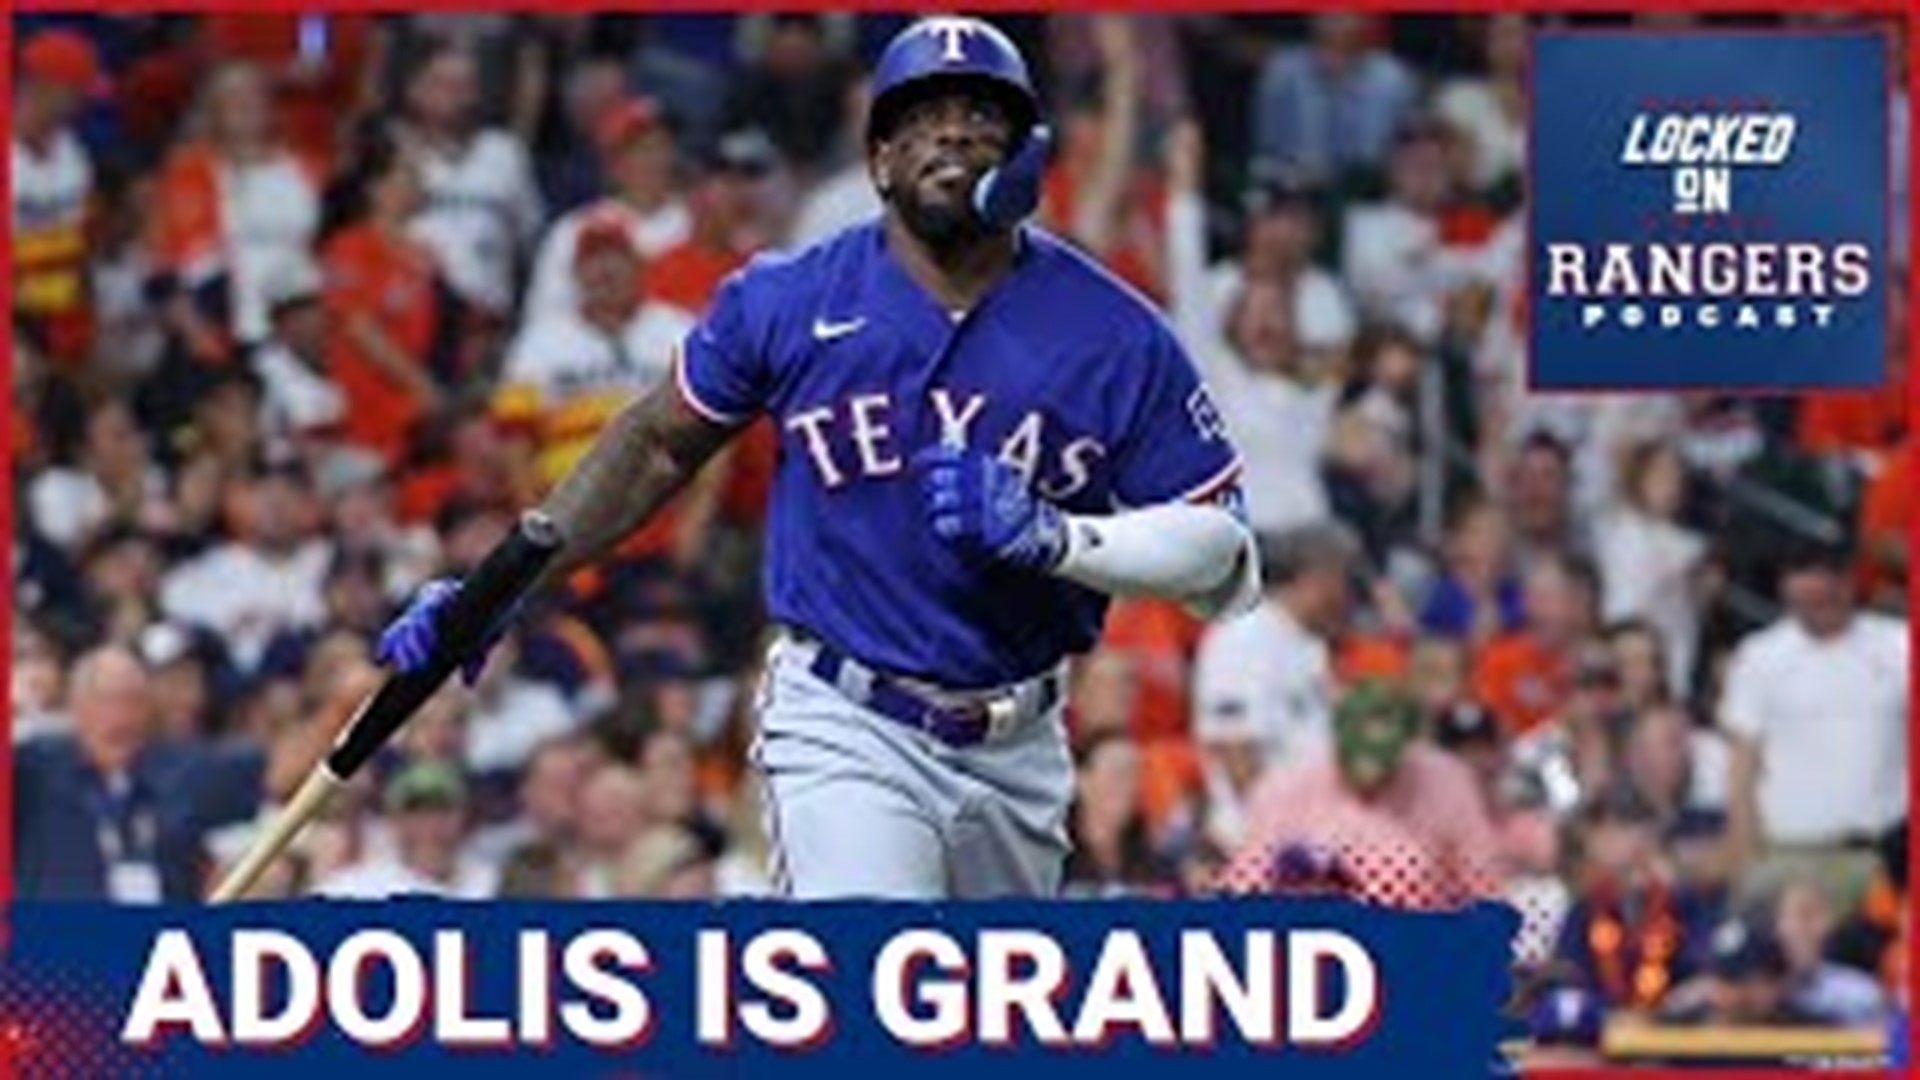 Who do the Texas Rangers play next in the ALCS?